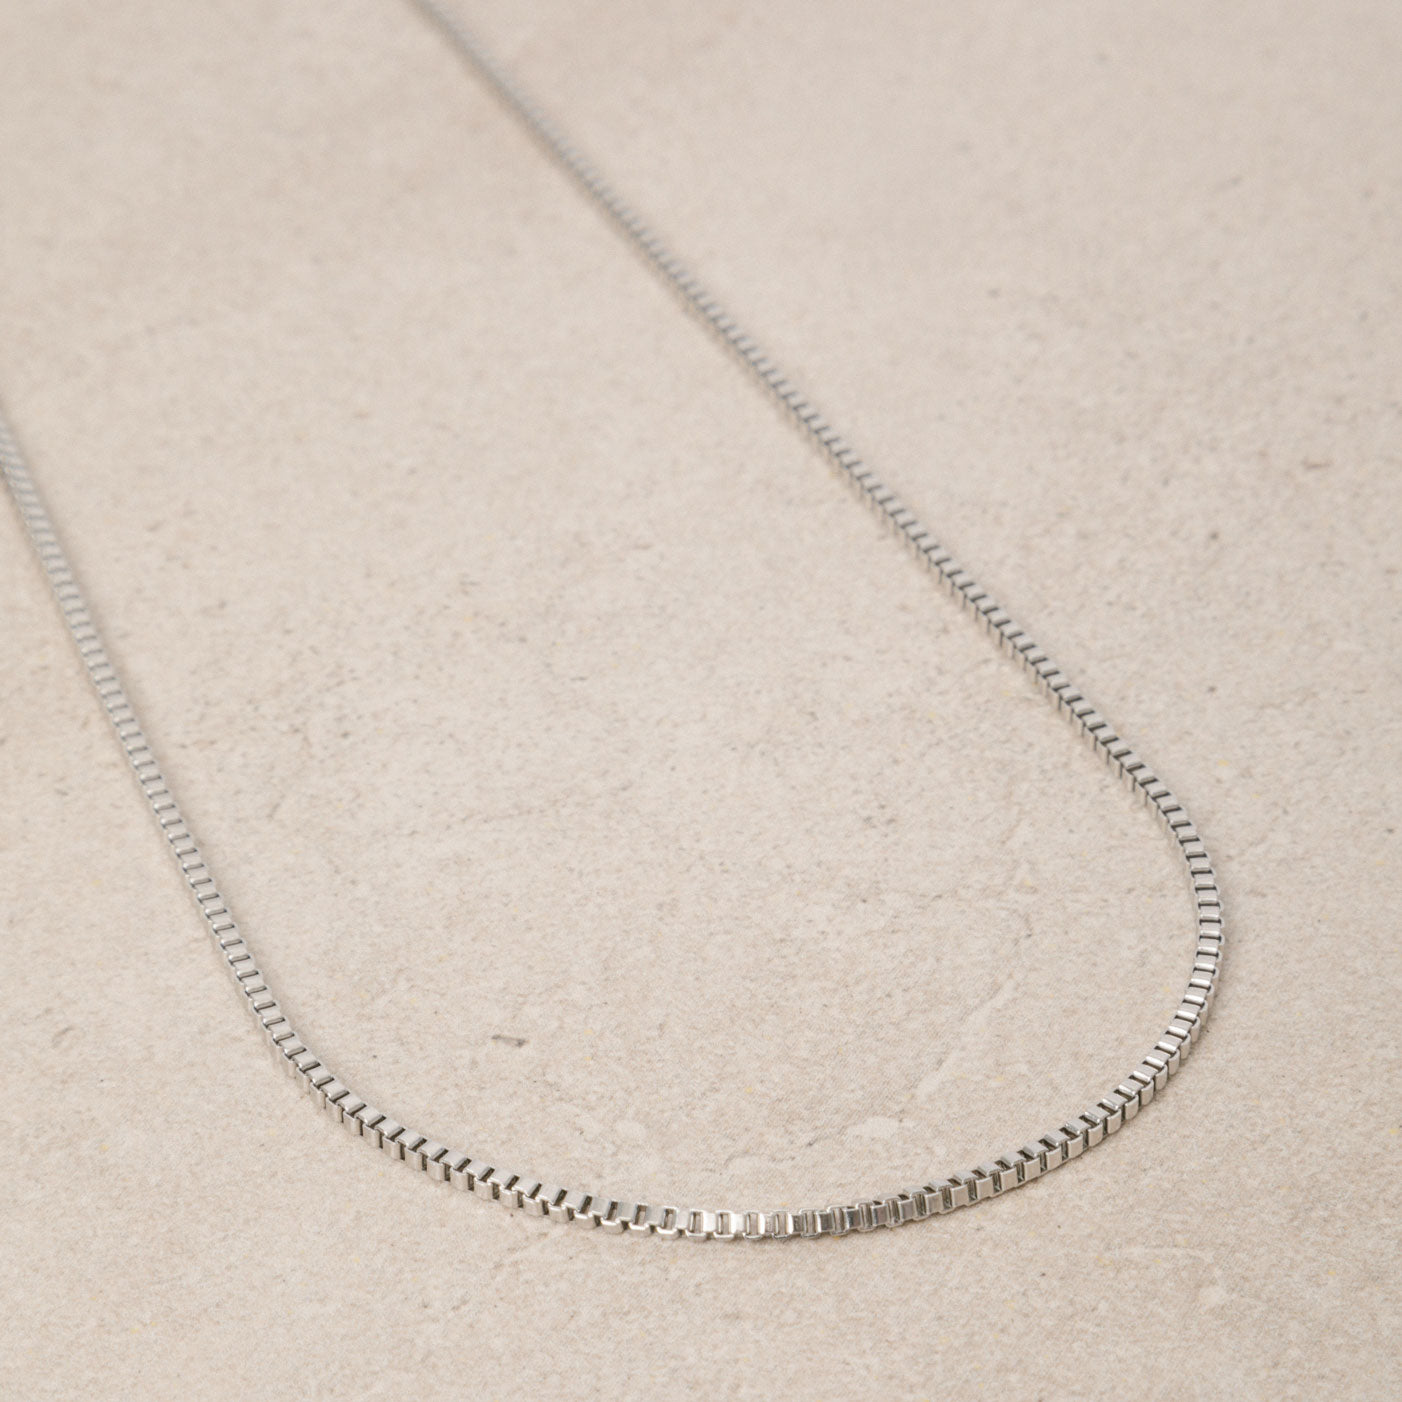 Image of the 2mm Square Box Chain crafted from high-grade Stainless Steel, measuring 22 inches / 56 cm in length and 2 mm in width. Weighing 5.8 grams, this chain is non-tarnishing and water-resistant.